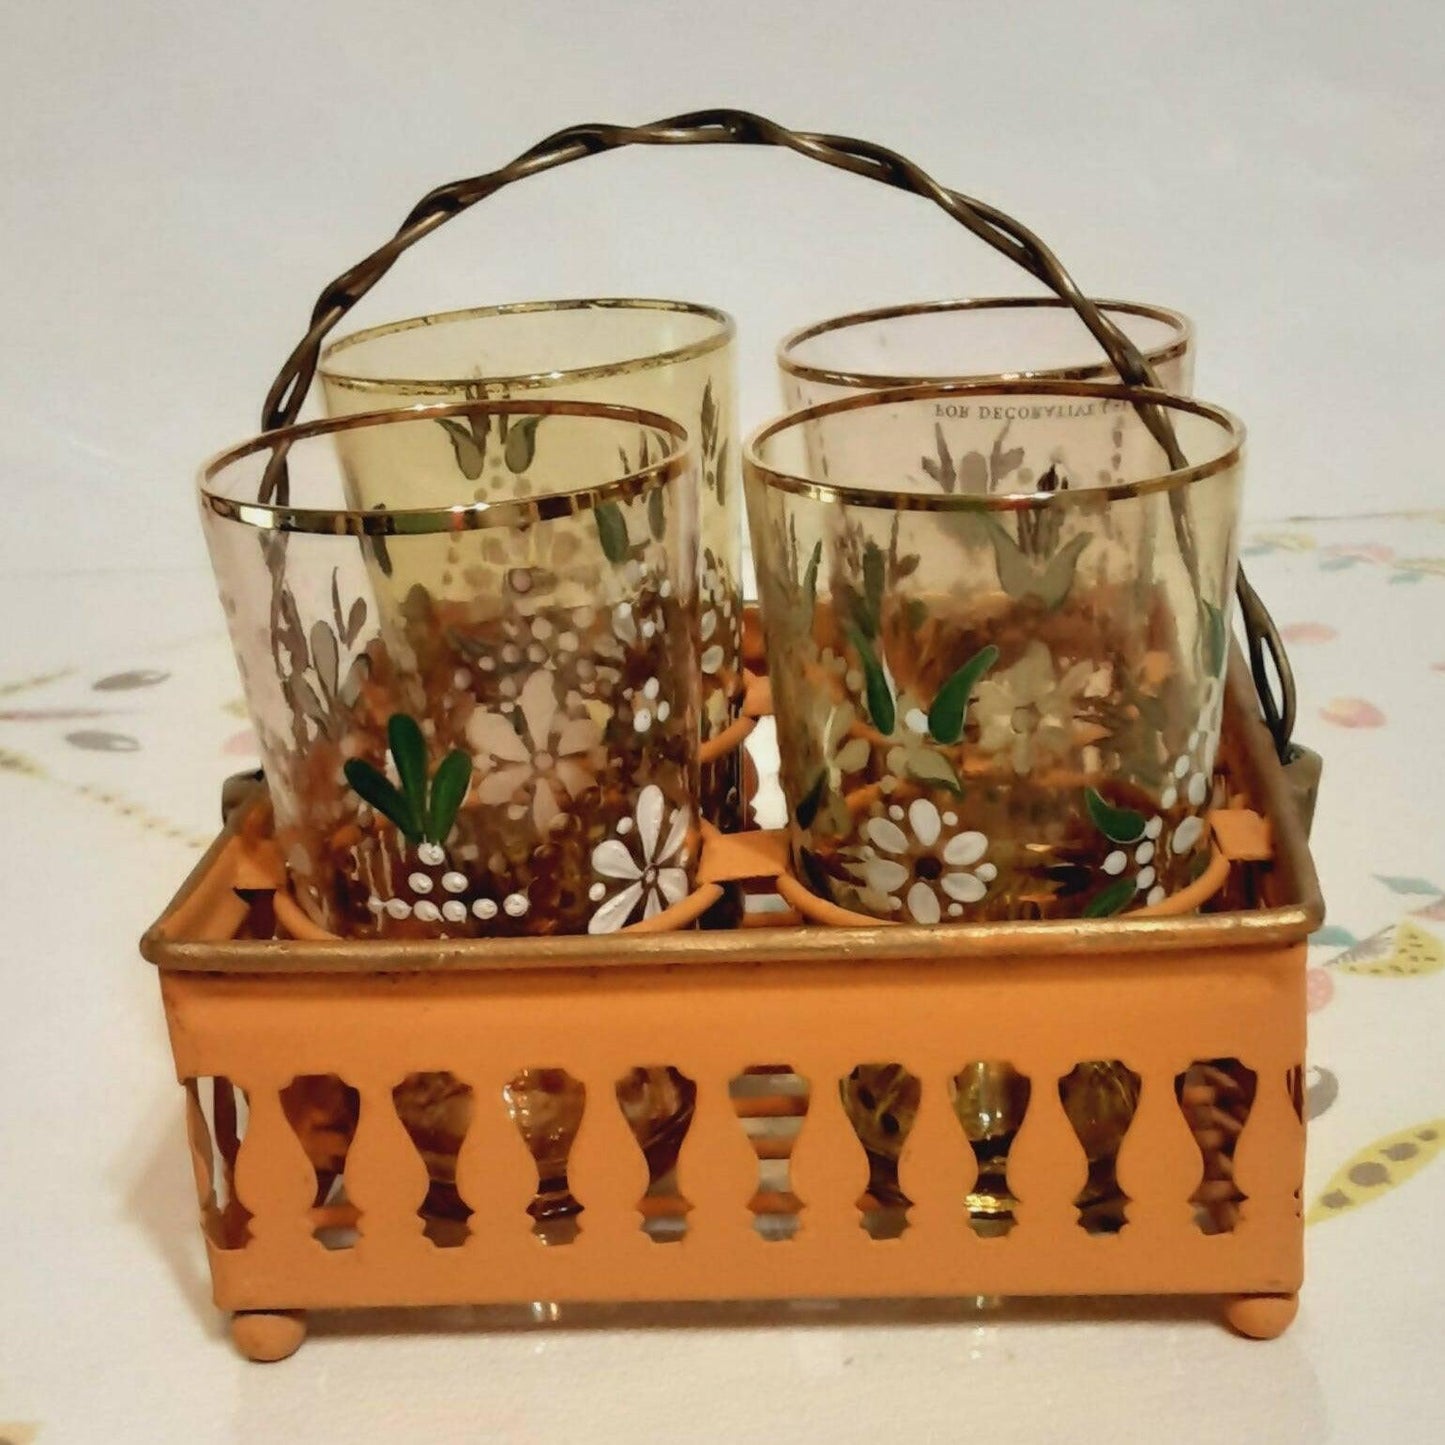 Vintage Northwood Glass Tumblers Hand Painted with Rack / Basket